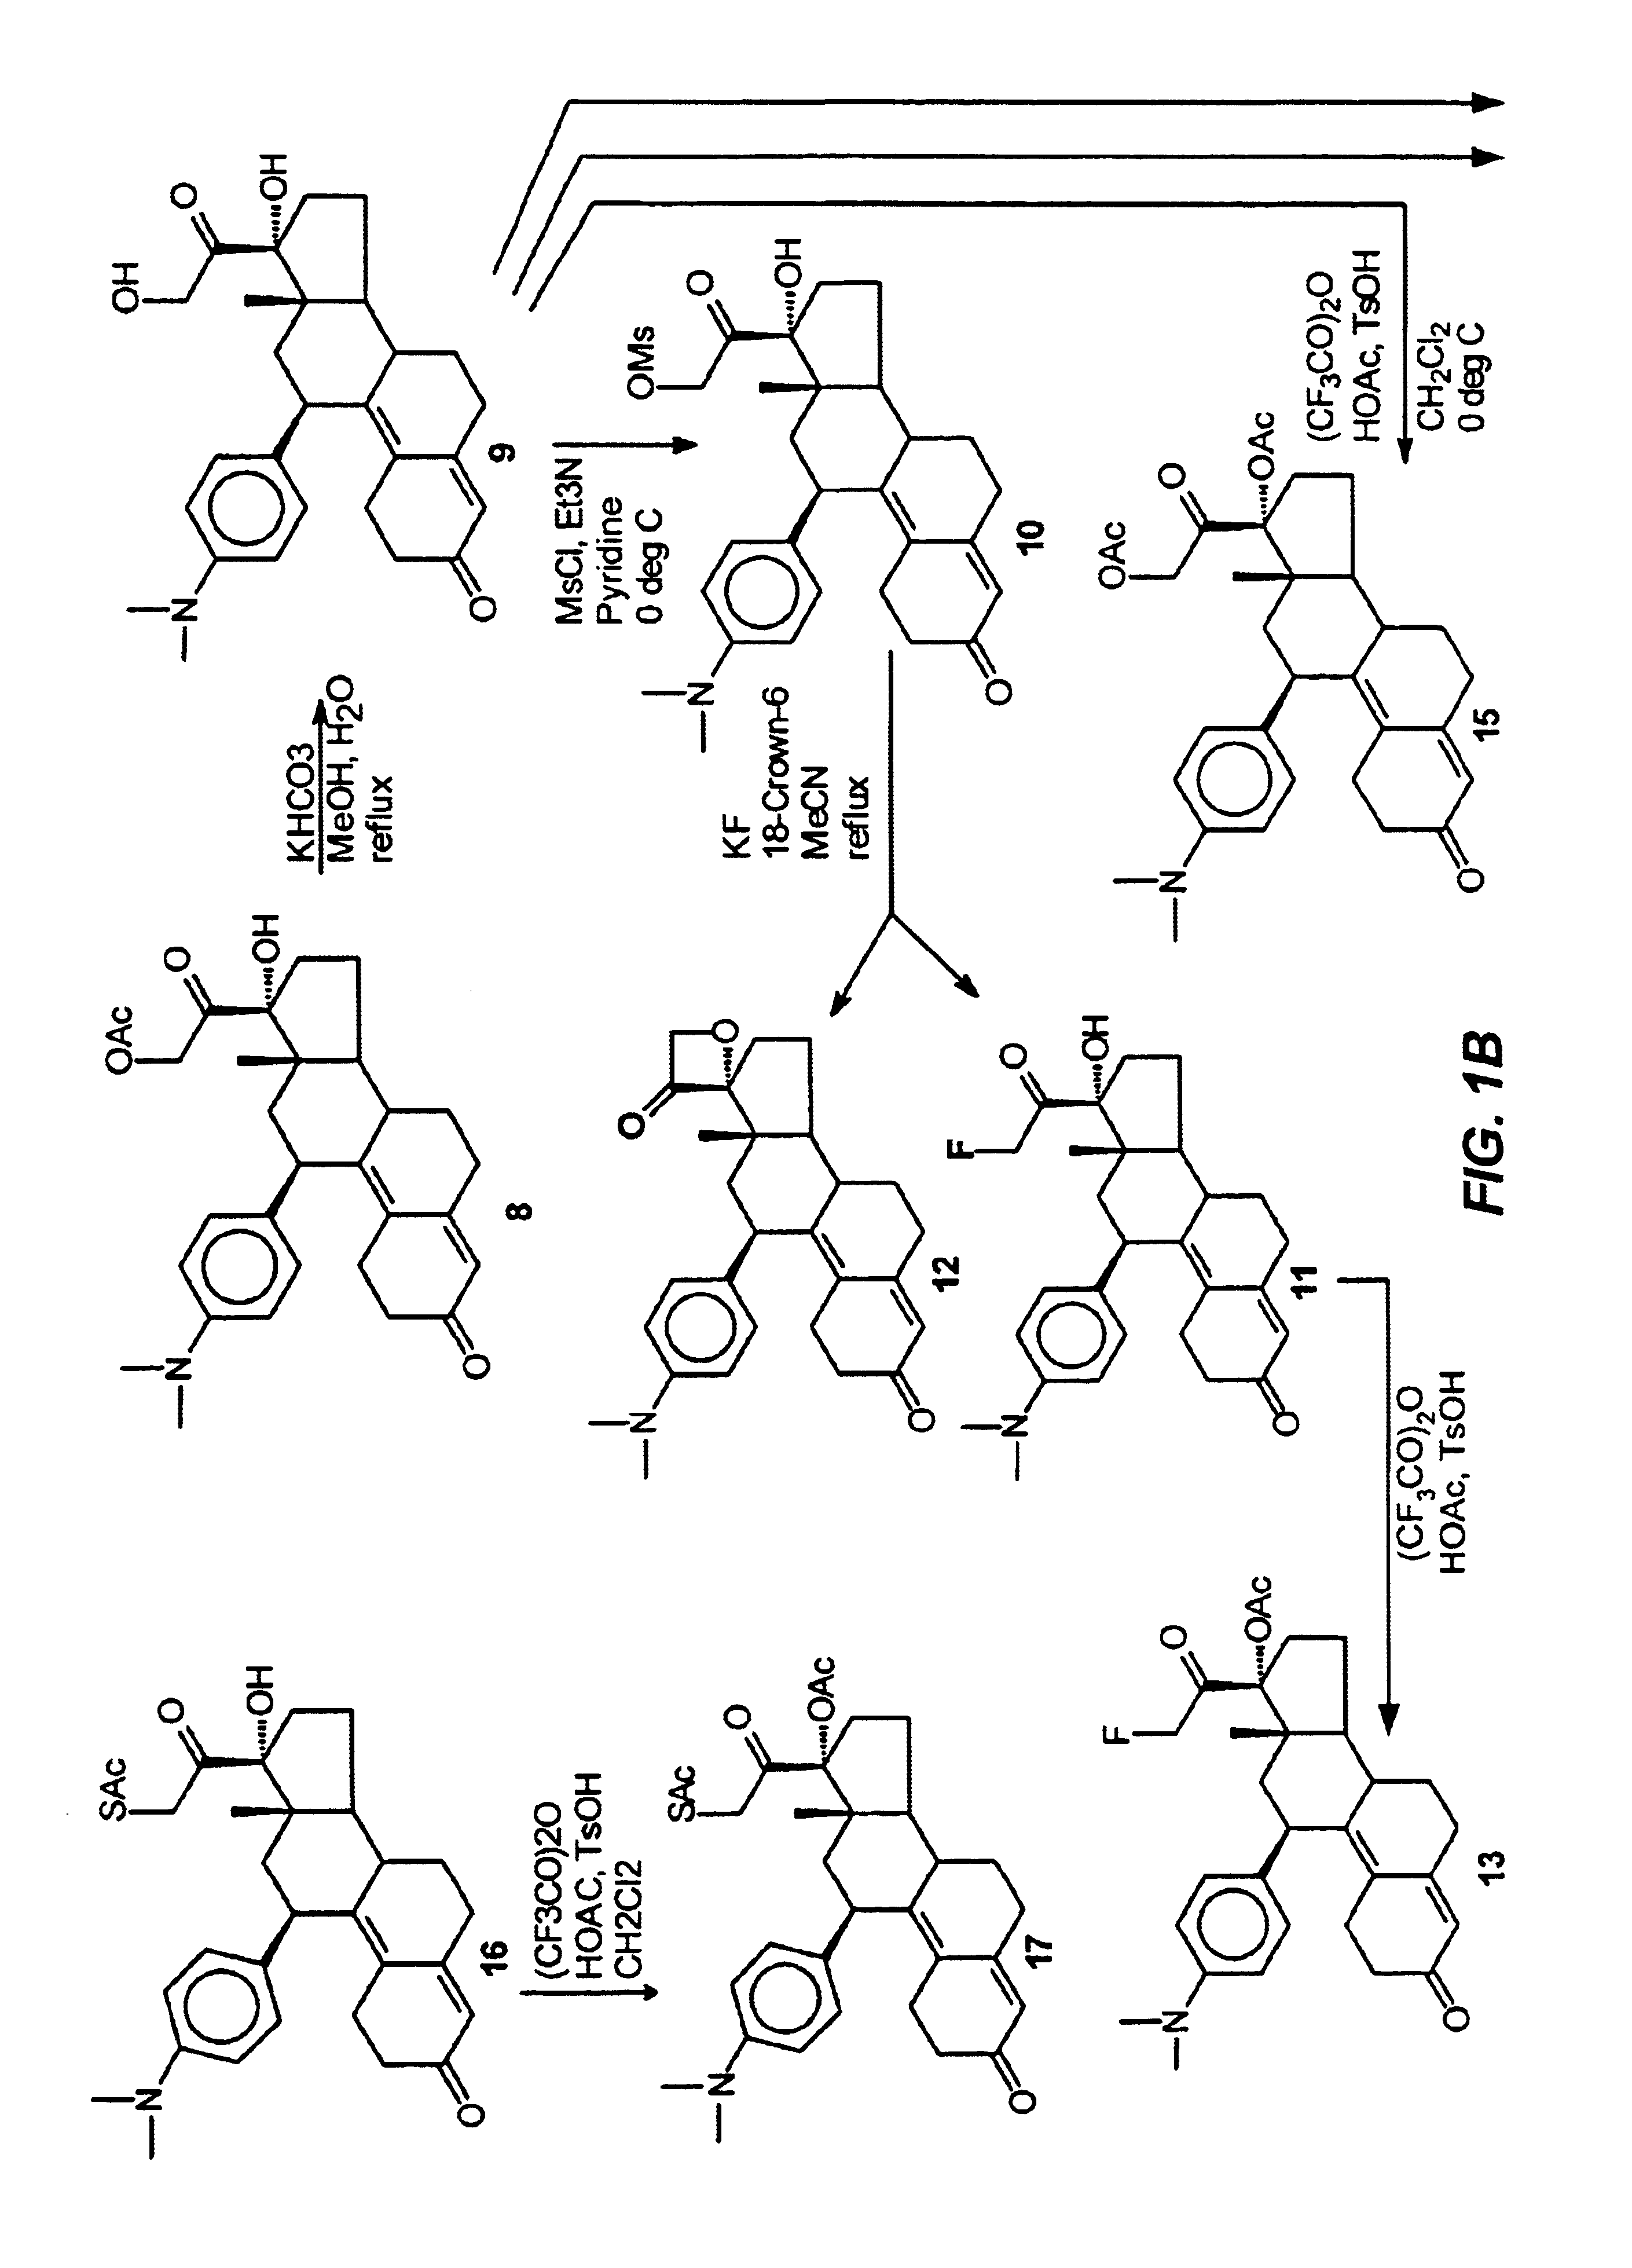 21-substituted progesterone derivatives as new antiprogestational agents